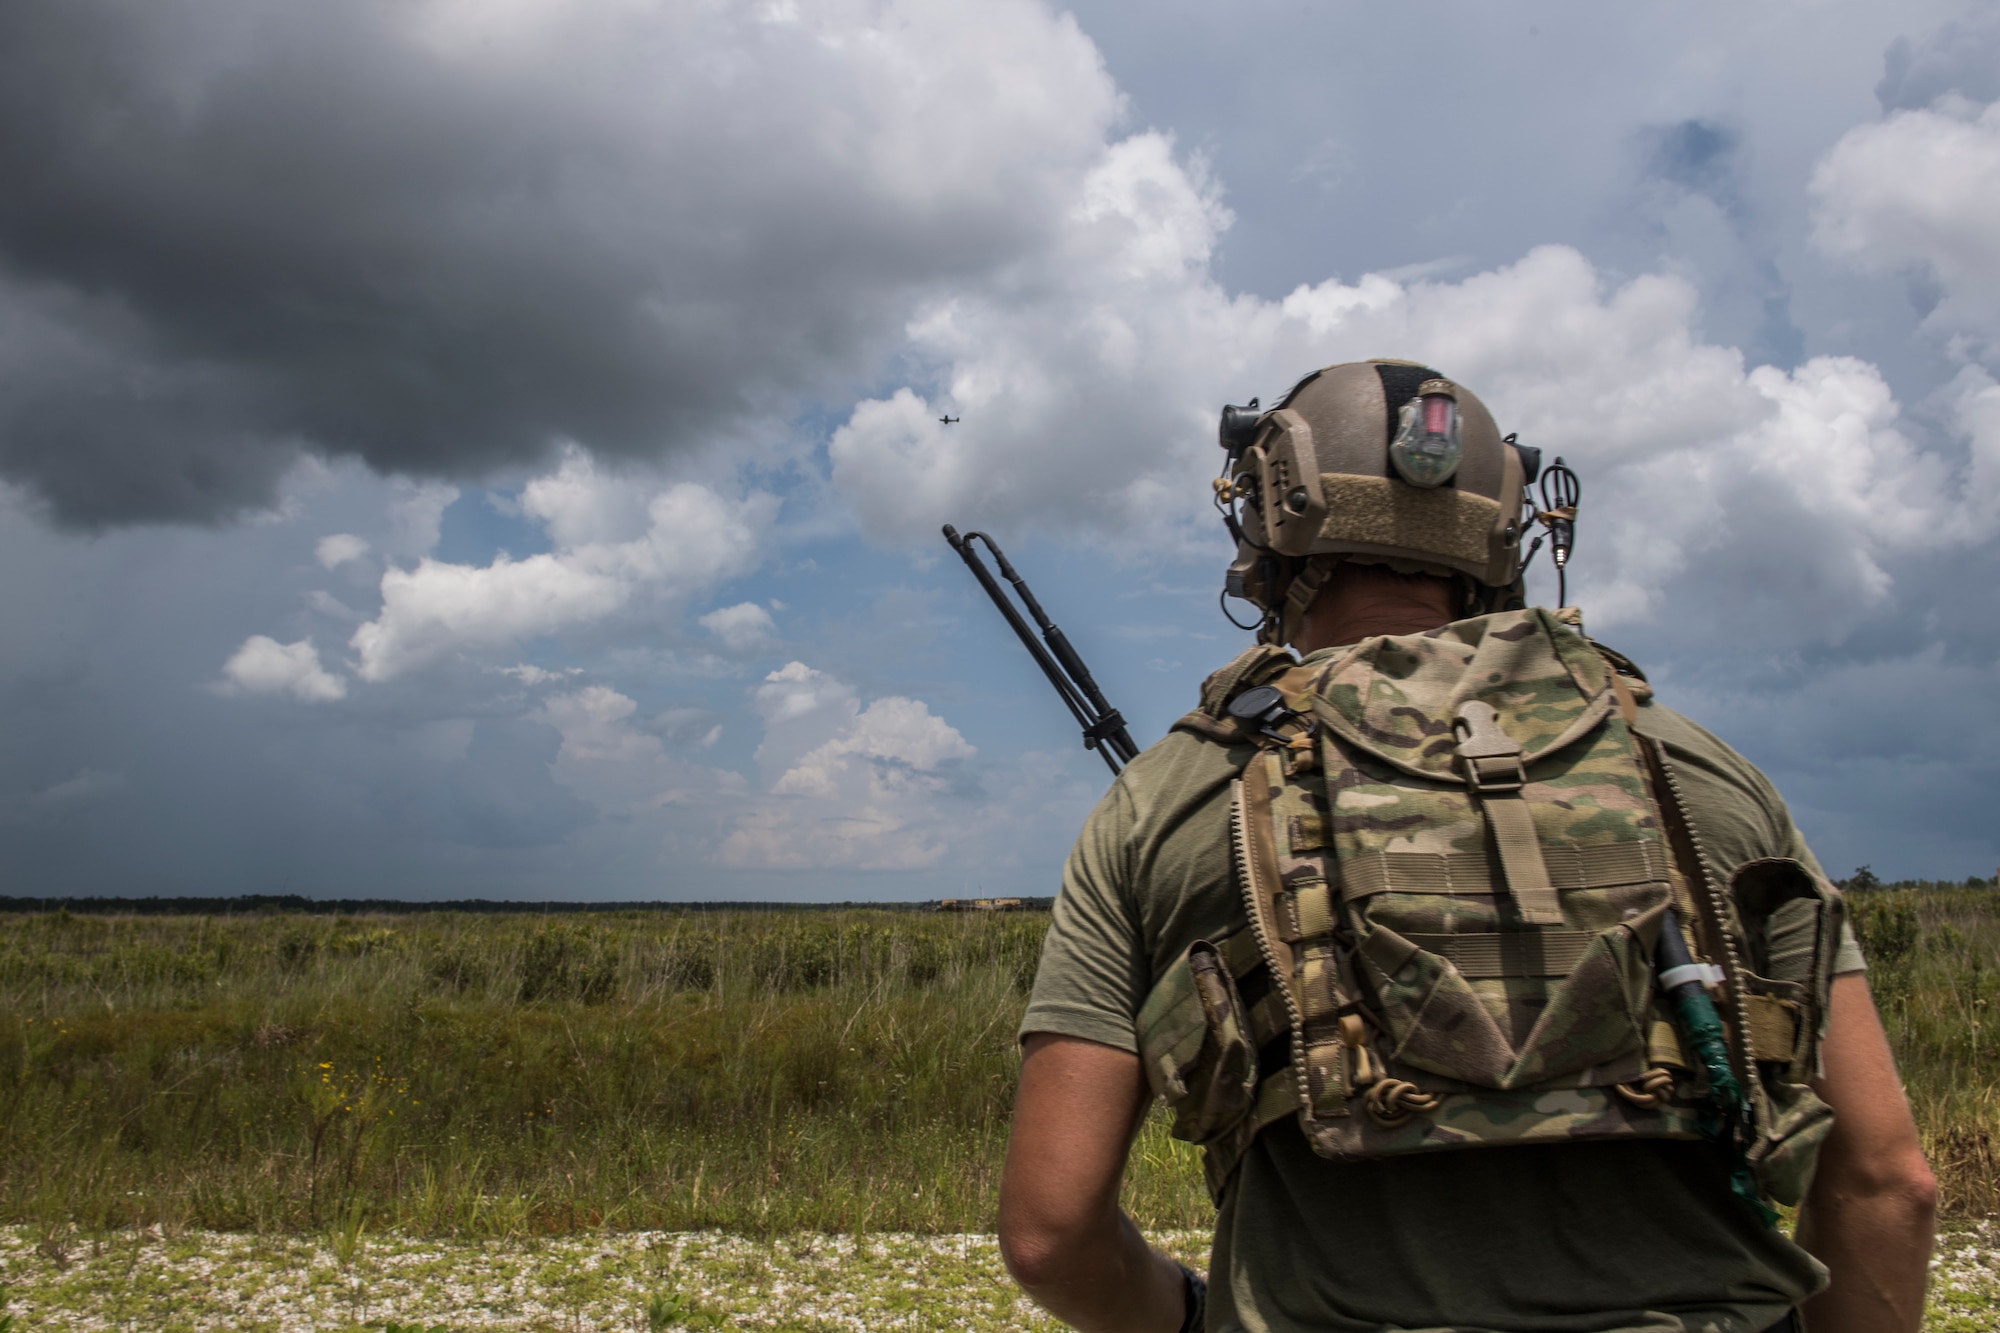 A special operations troop stands with his backpack to the camera looking over a landing area of sand and tall grass with mixed clouds in a blue sky in the background.